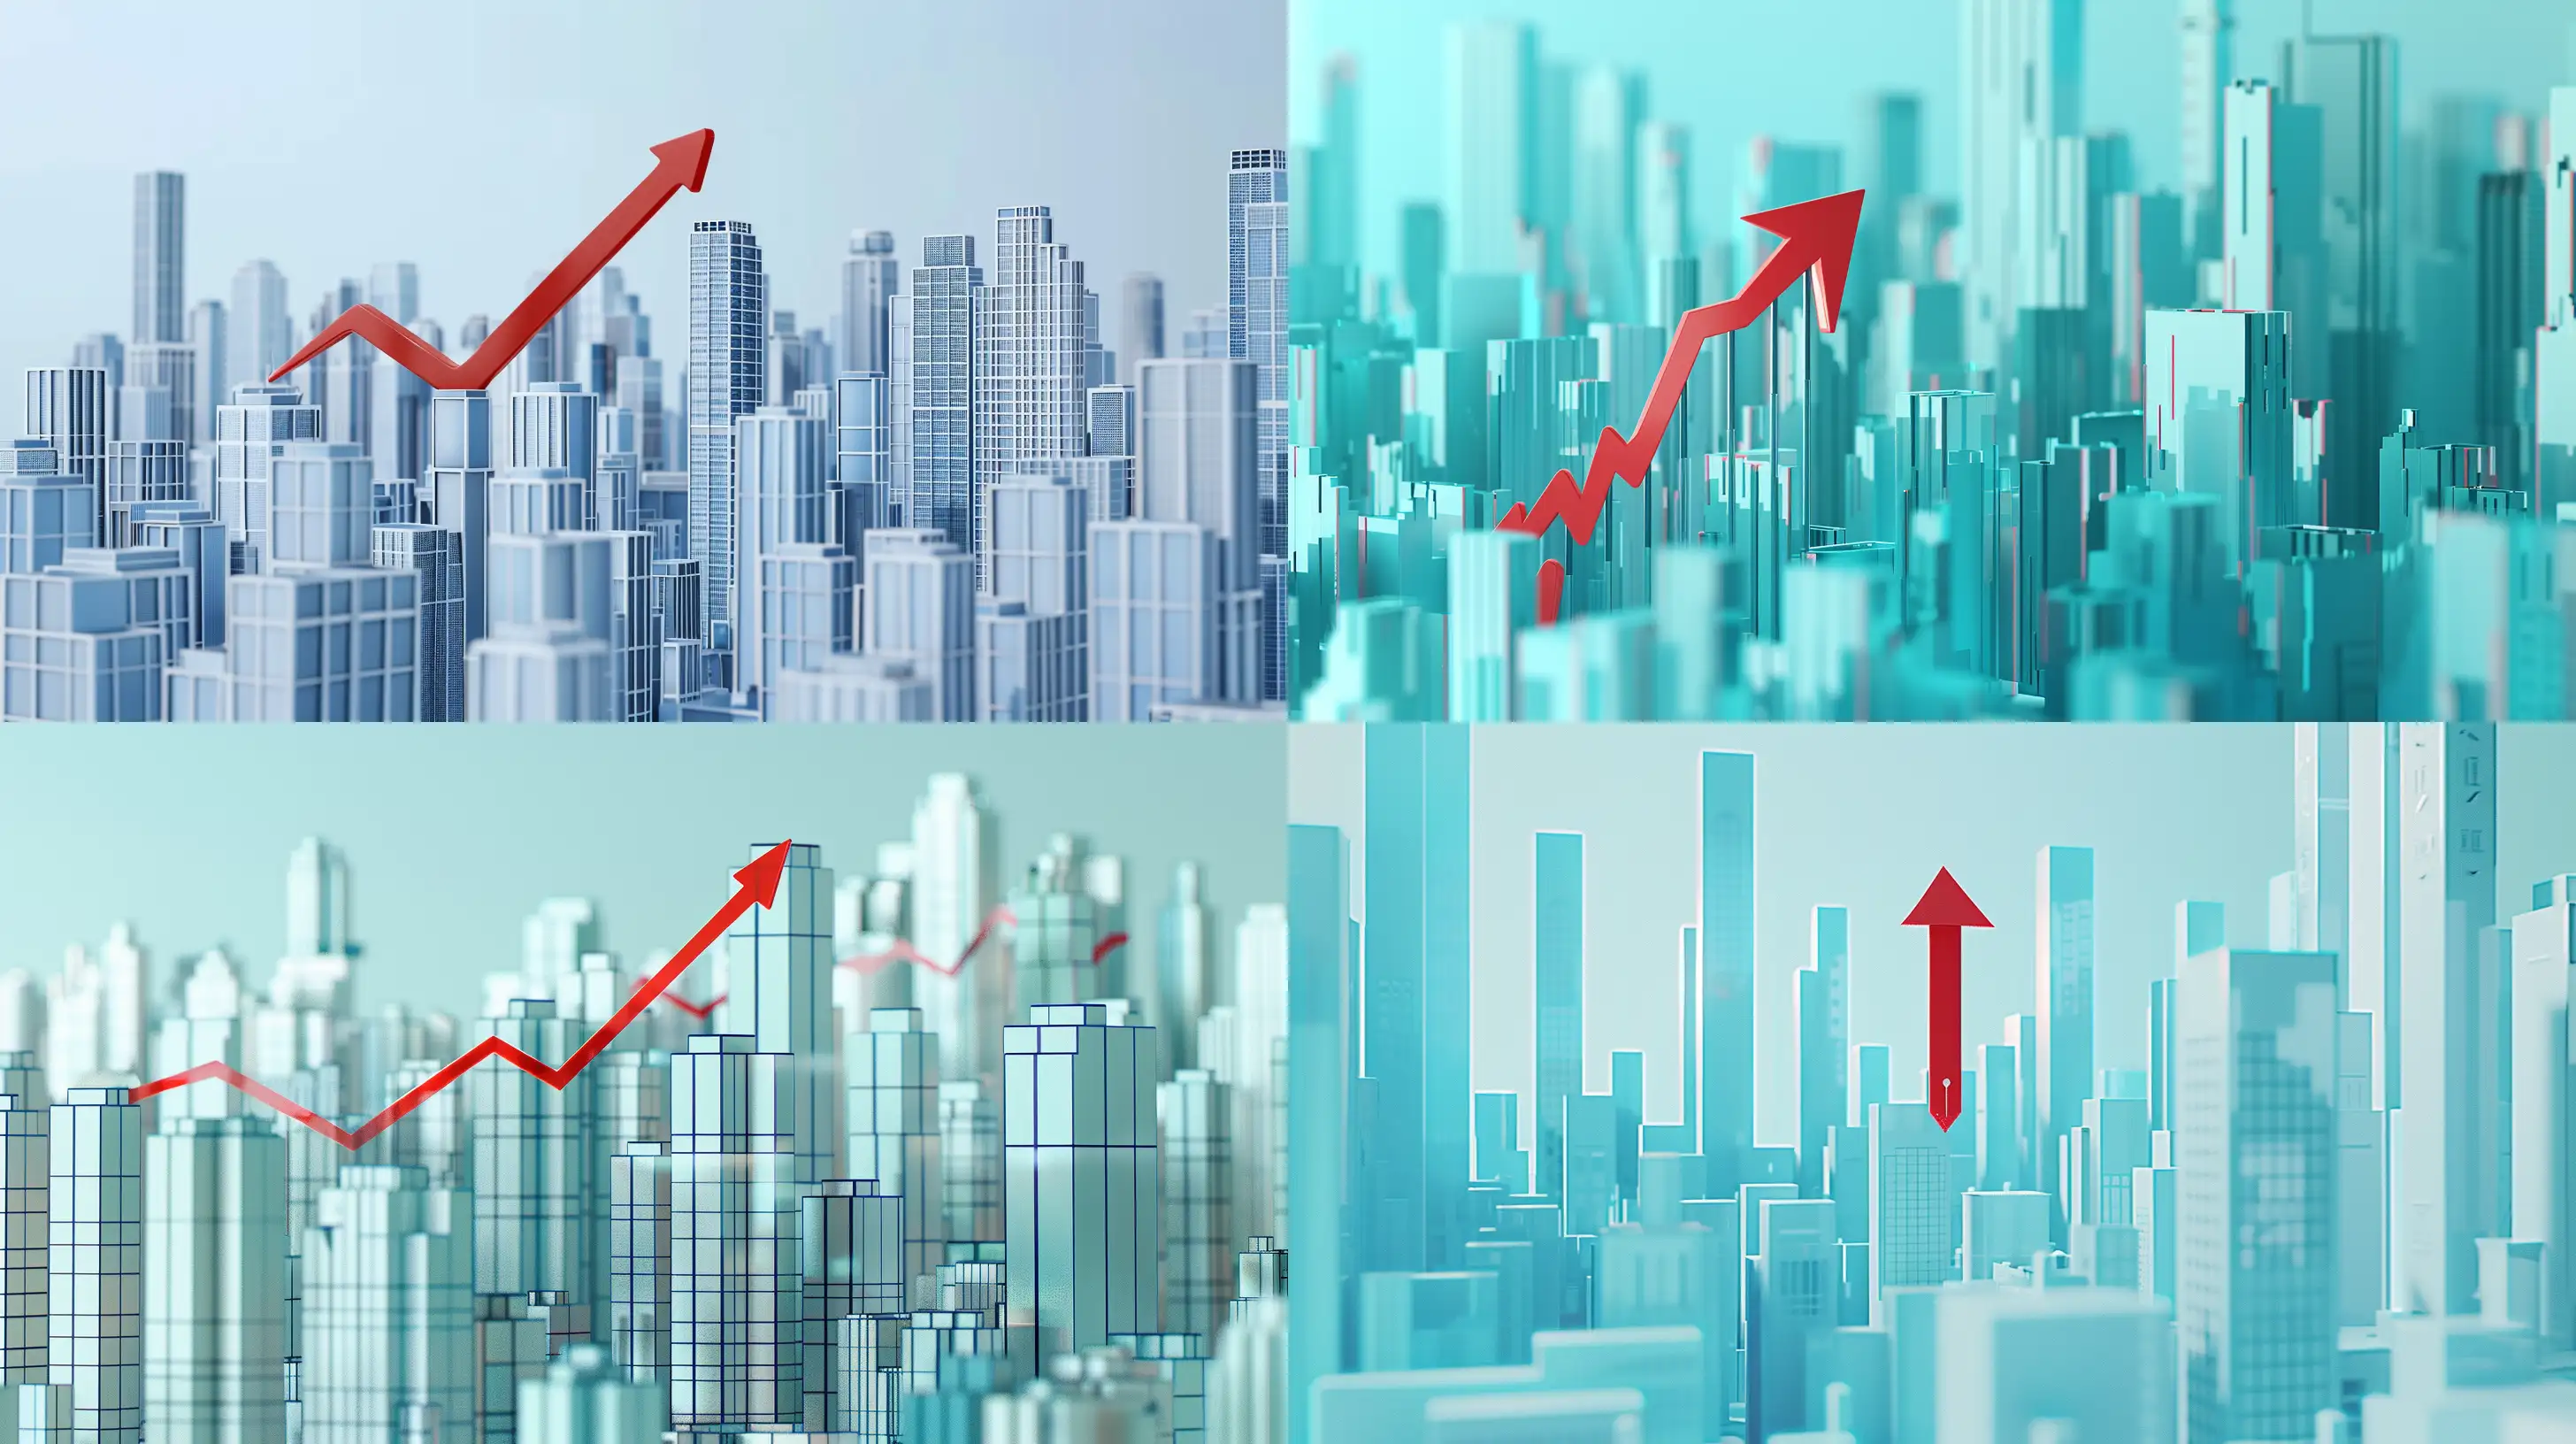 Create a 16:9 image of a 3D stylized economic graph depicting inflation. The scene should feature a rising red arrow over a cityscape composed of columns of different heights, representing economic data. The background should be a light blue to emphasize the graph. The design should convey a clear visual representation of economic growth or inflation --ar 16:9